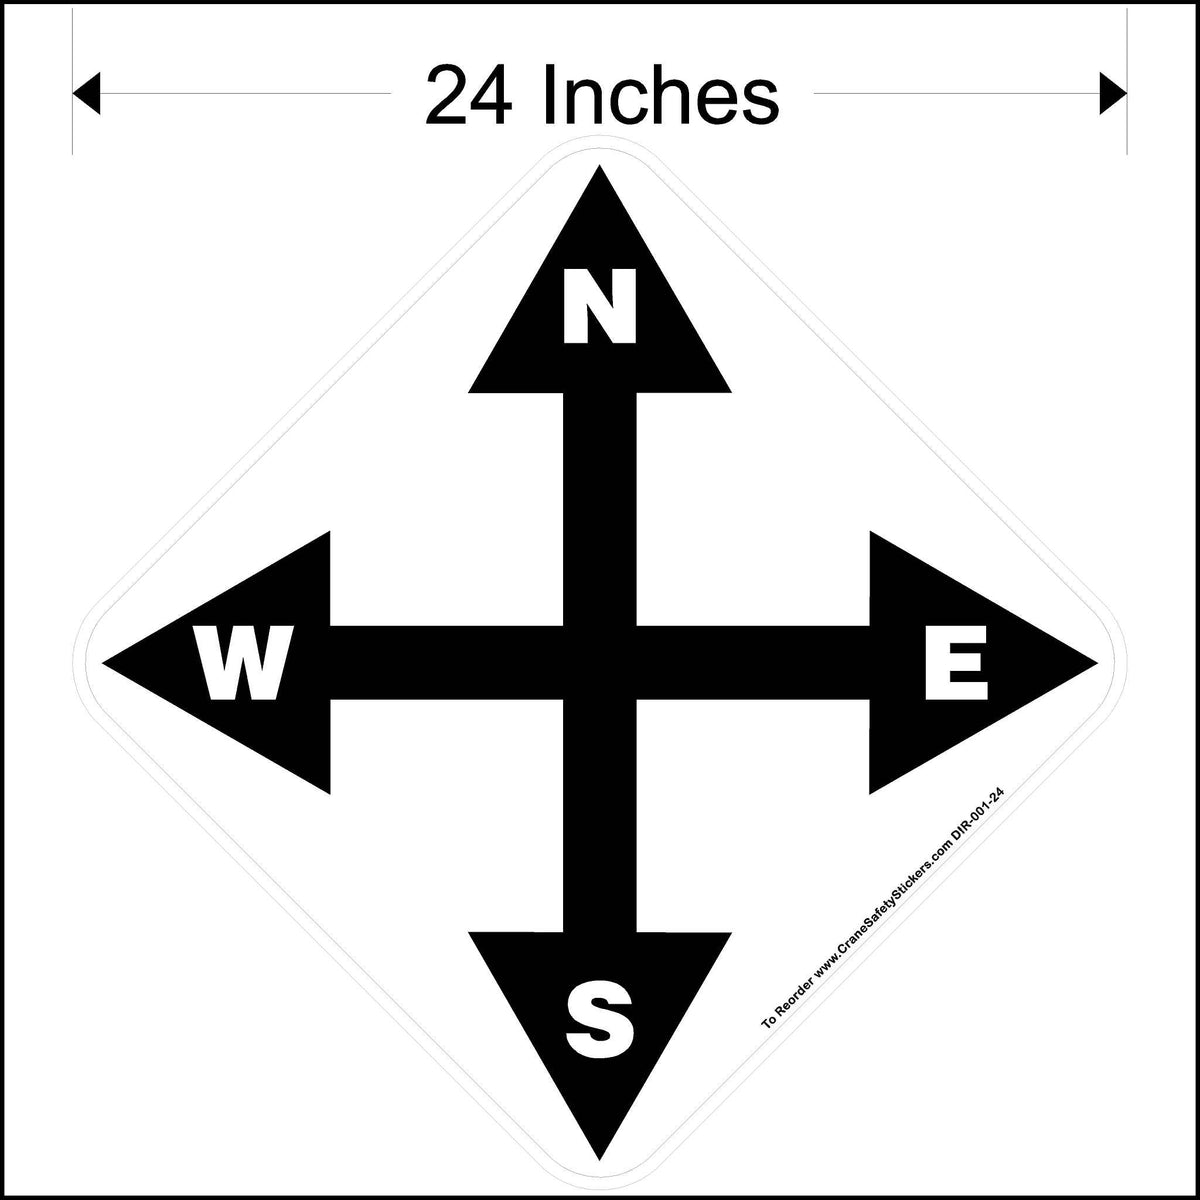 24 Inch North South East West Overhead Crane Directional Decal.